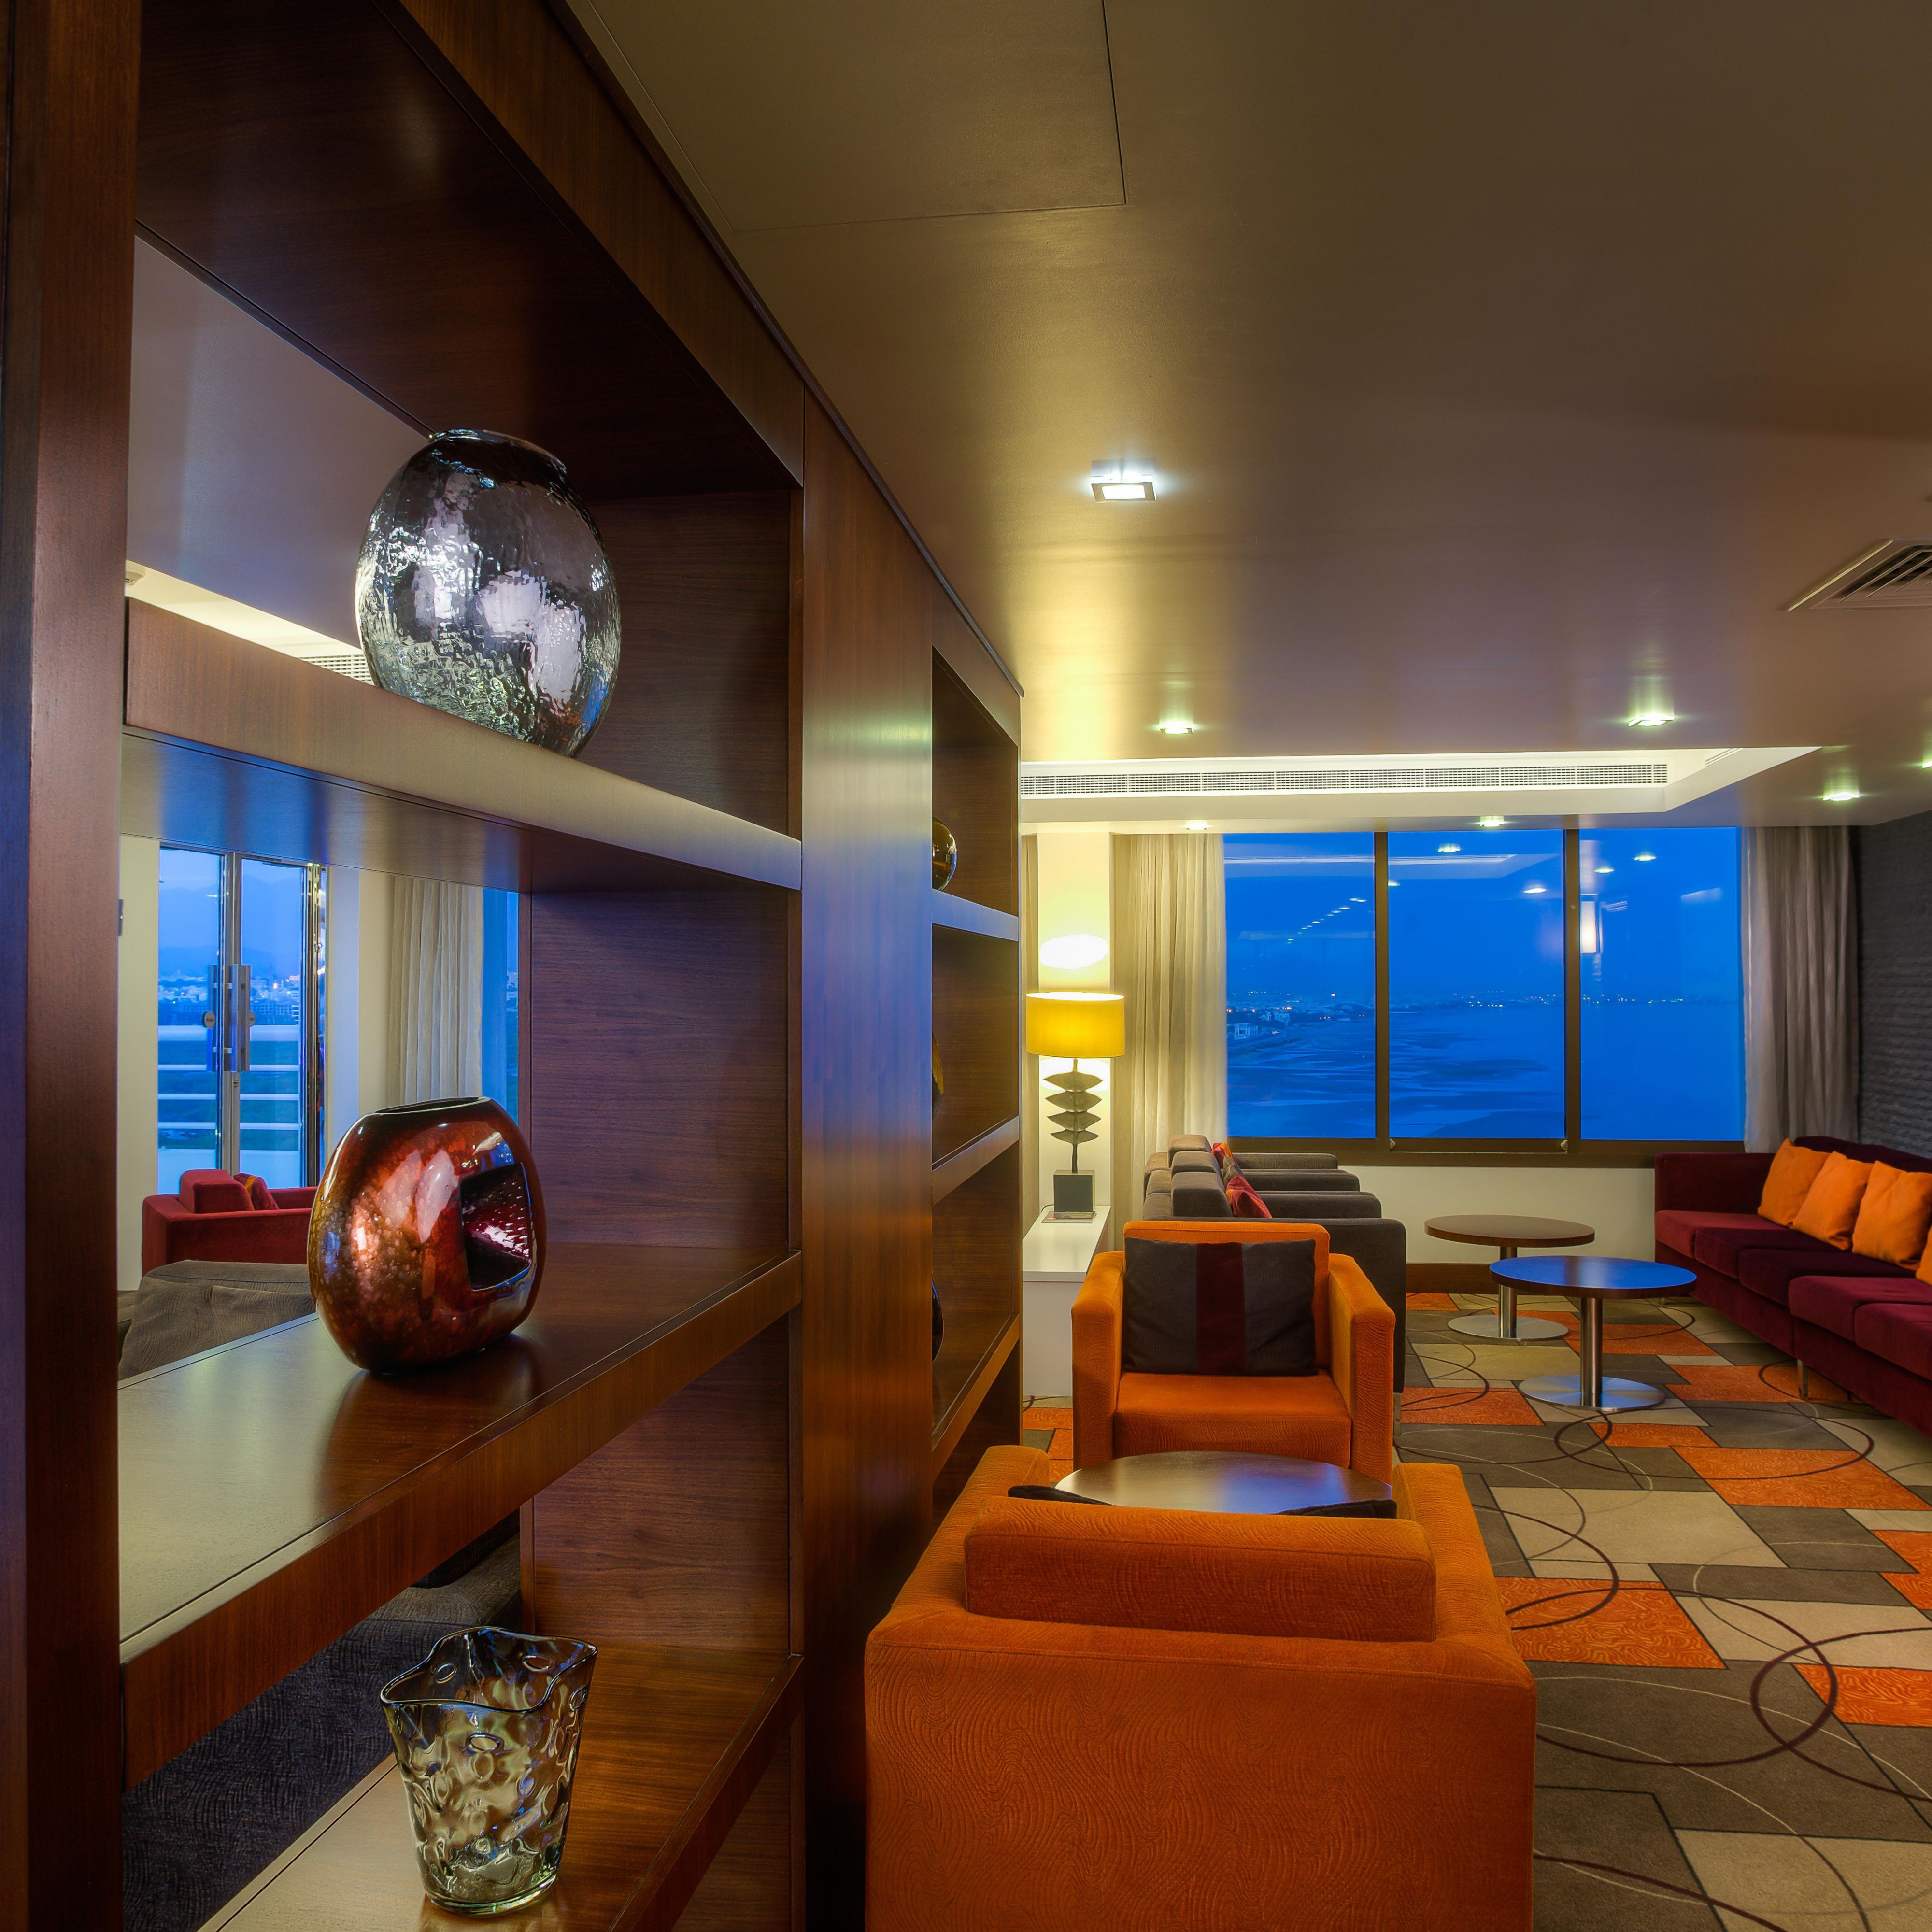 Club room guests gain exclusive access to the Club Lounge